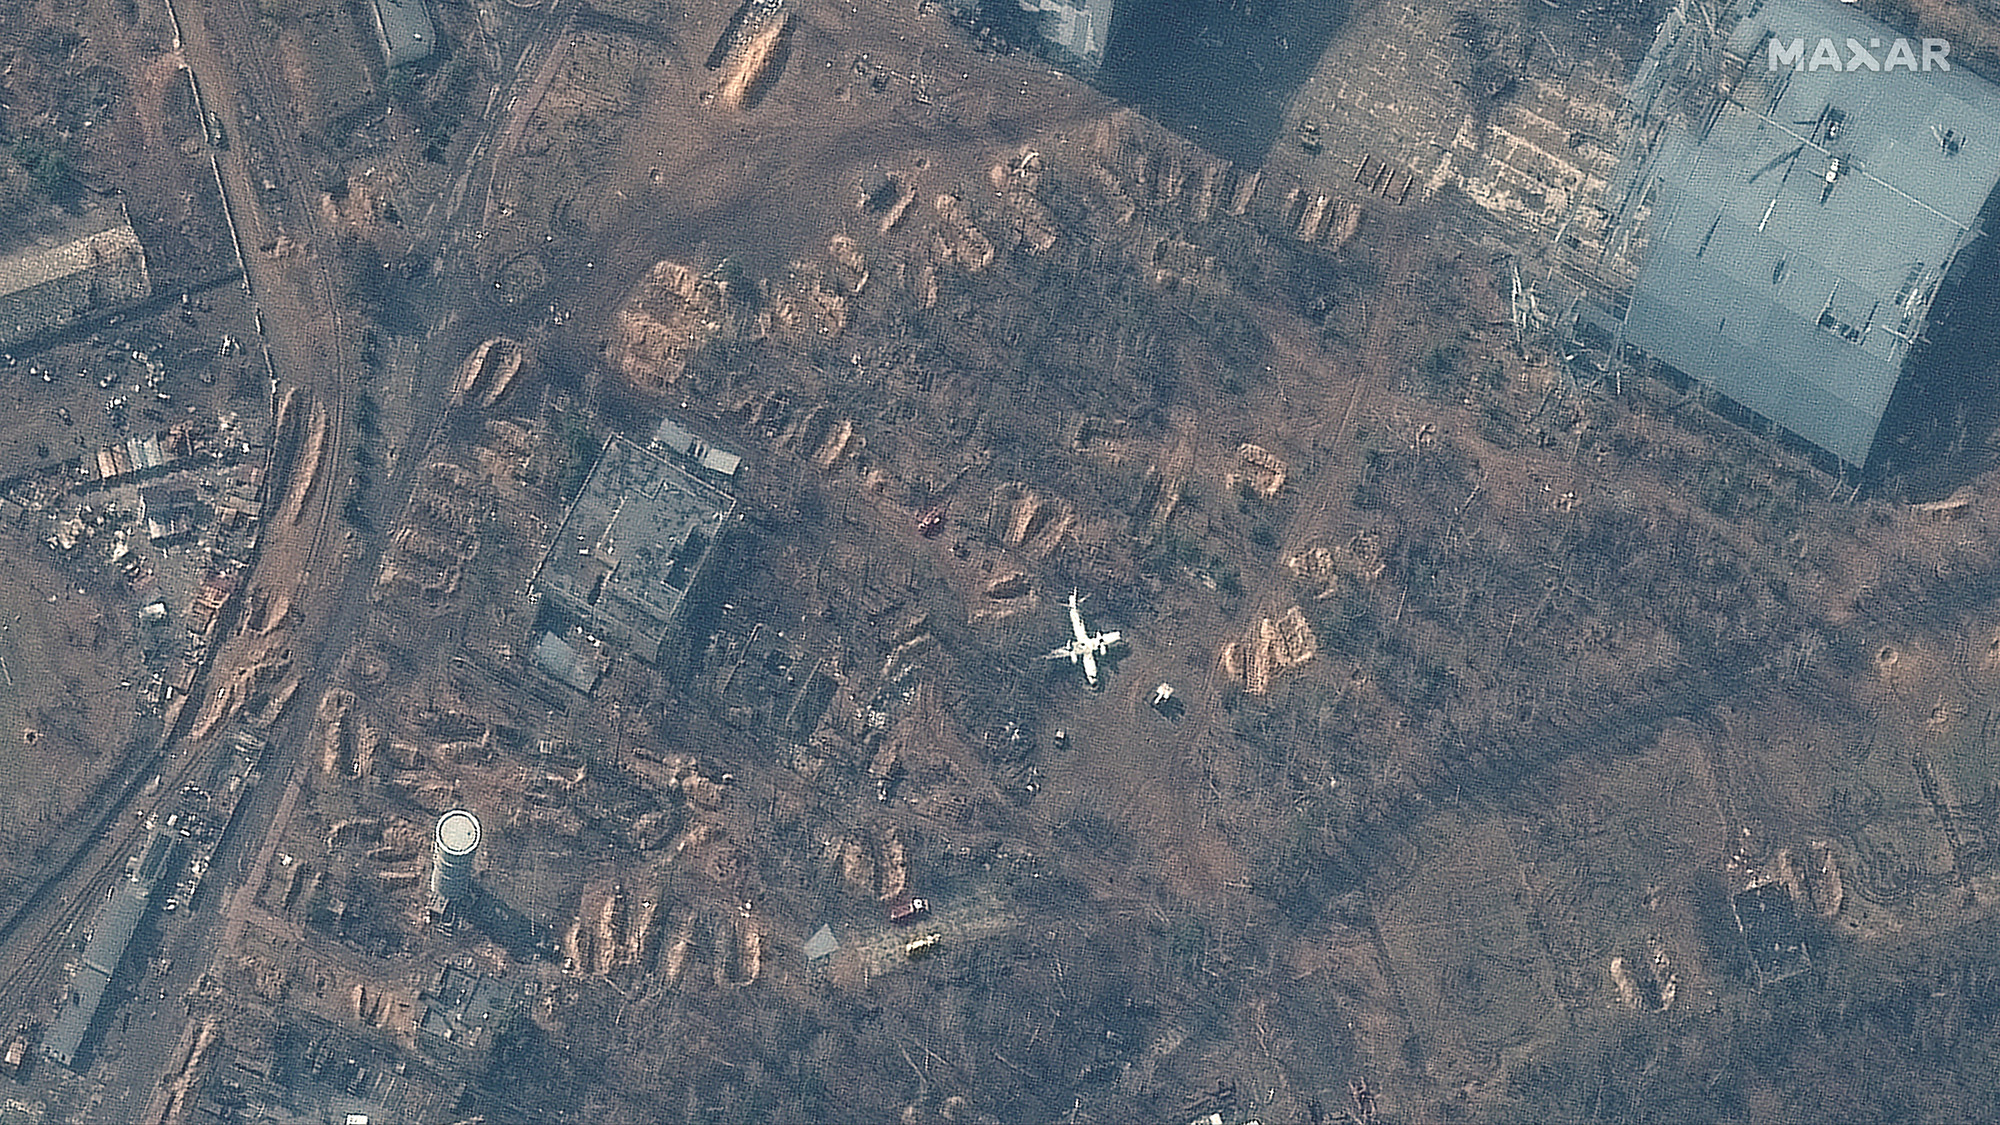 Russian forces have withdrawn from Antonov Airport, outside of Kyiv, satellite images confirm